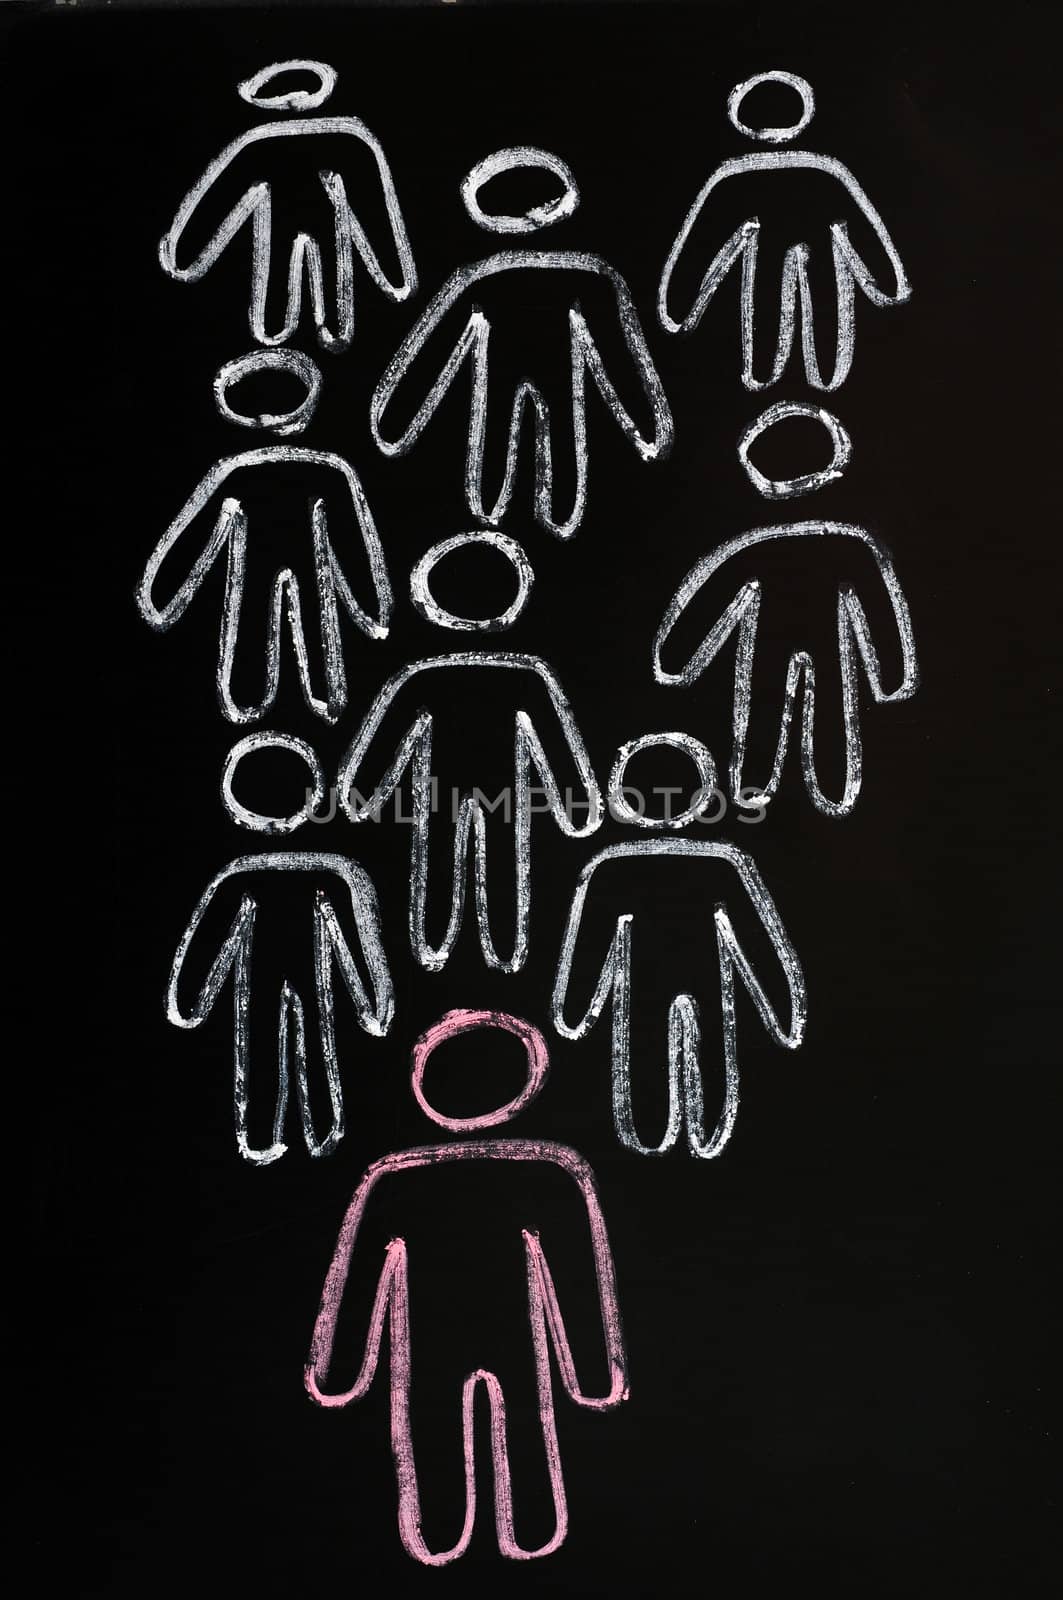 Working together team concept on blackboard background by bbbar